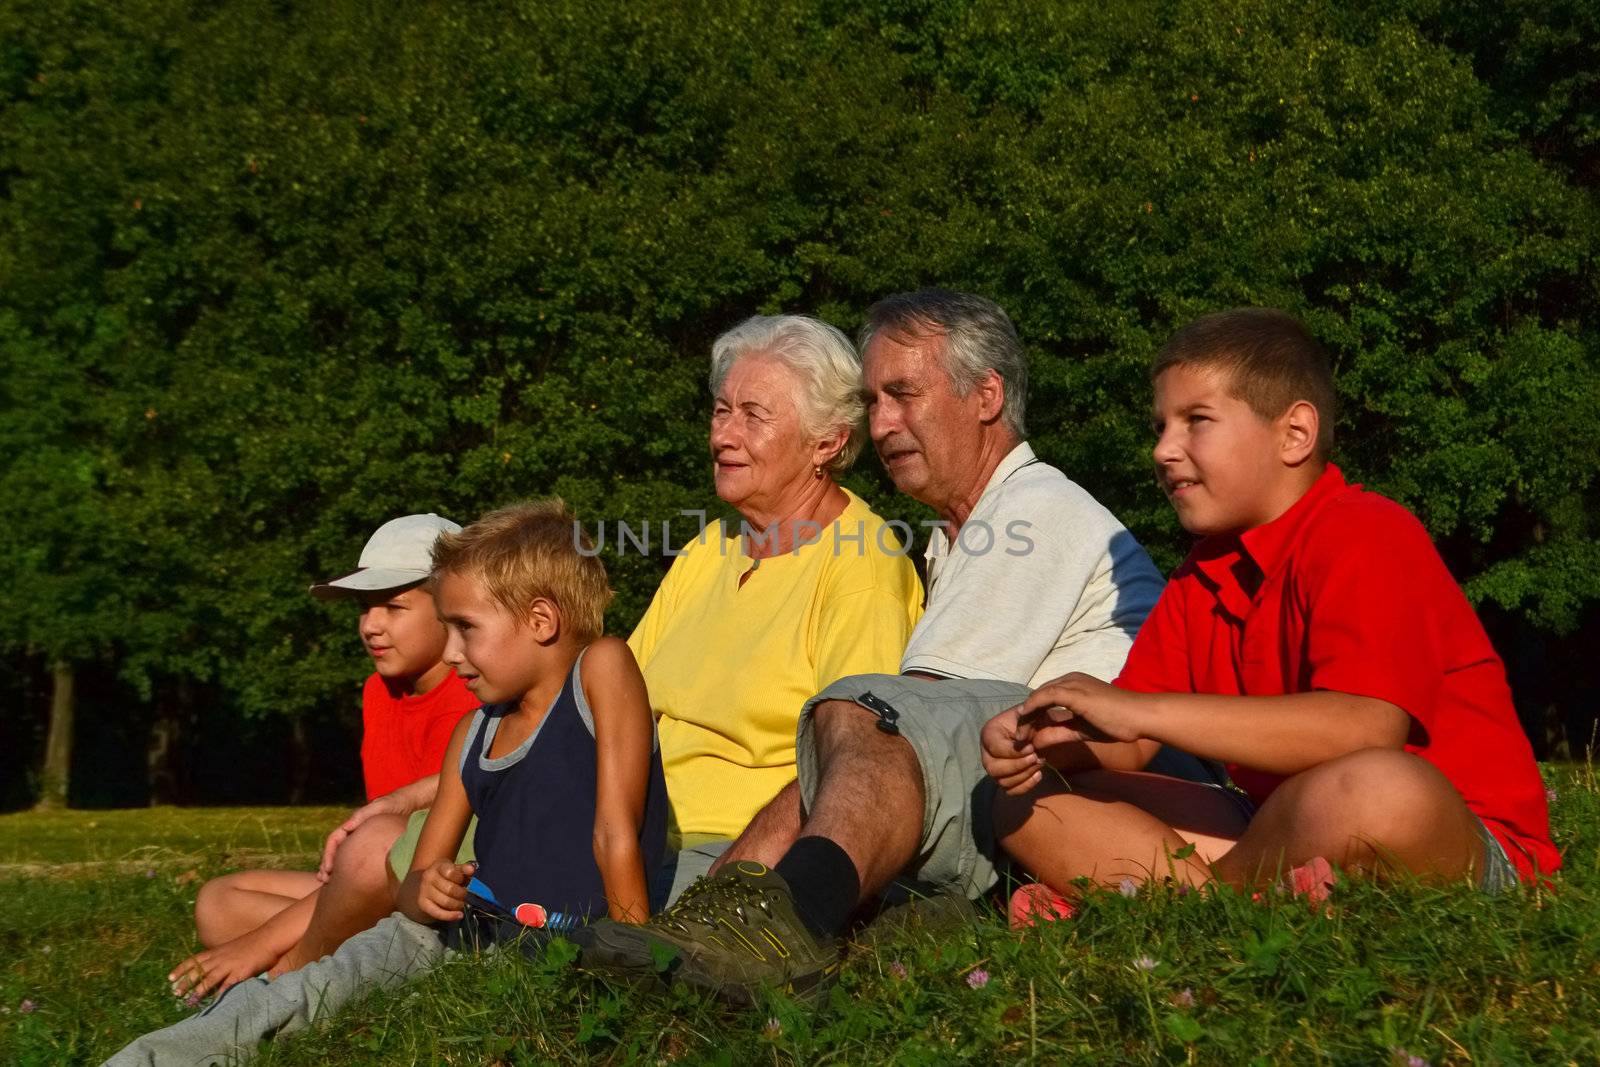 Senior couple and their grandchildren talking and relaxing in nature on a sunny afternoon, with trees in the background.